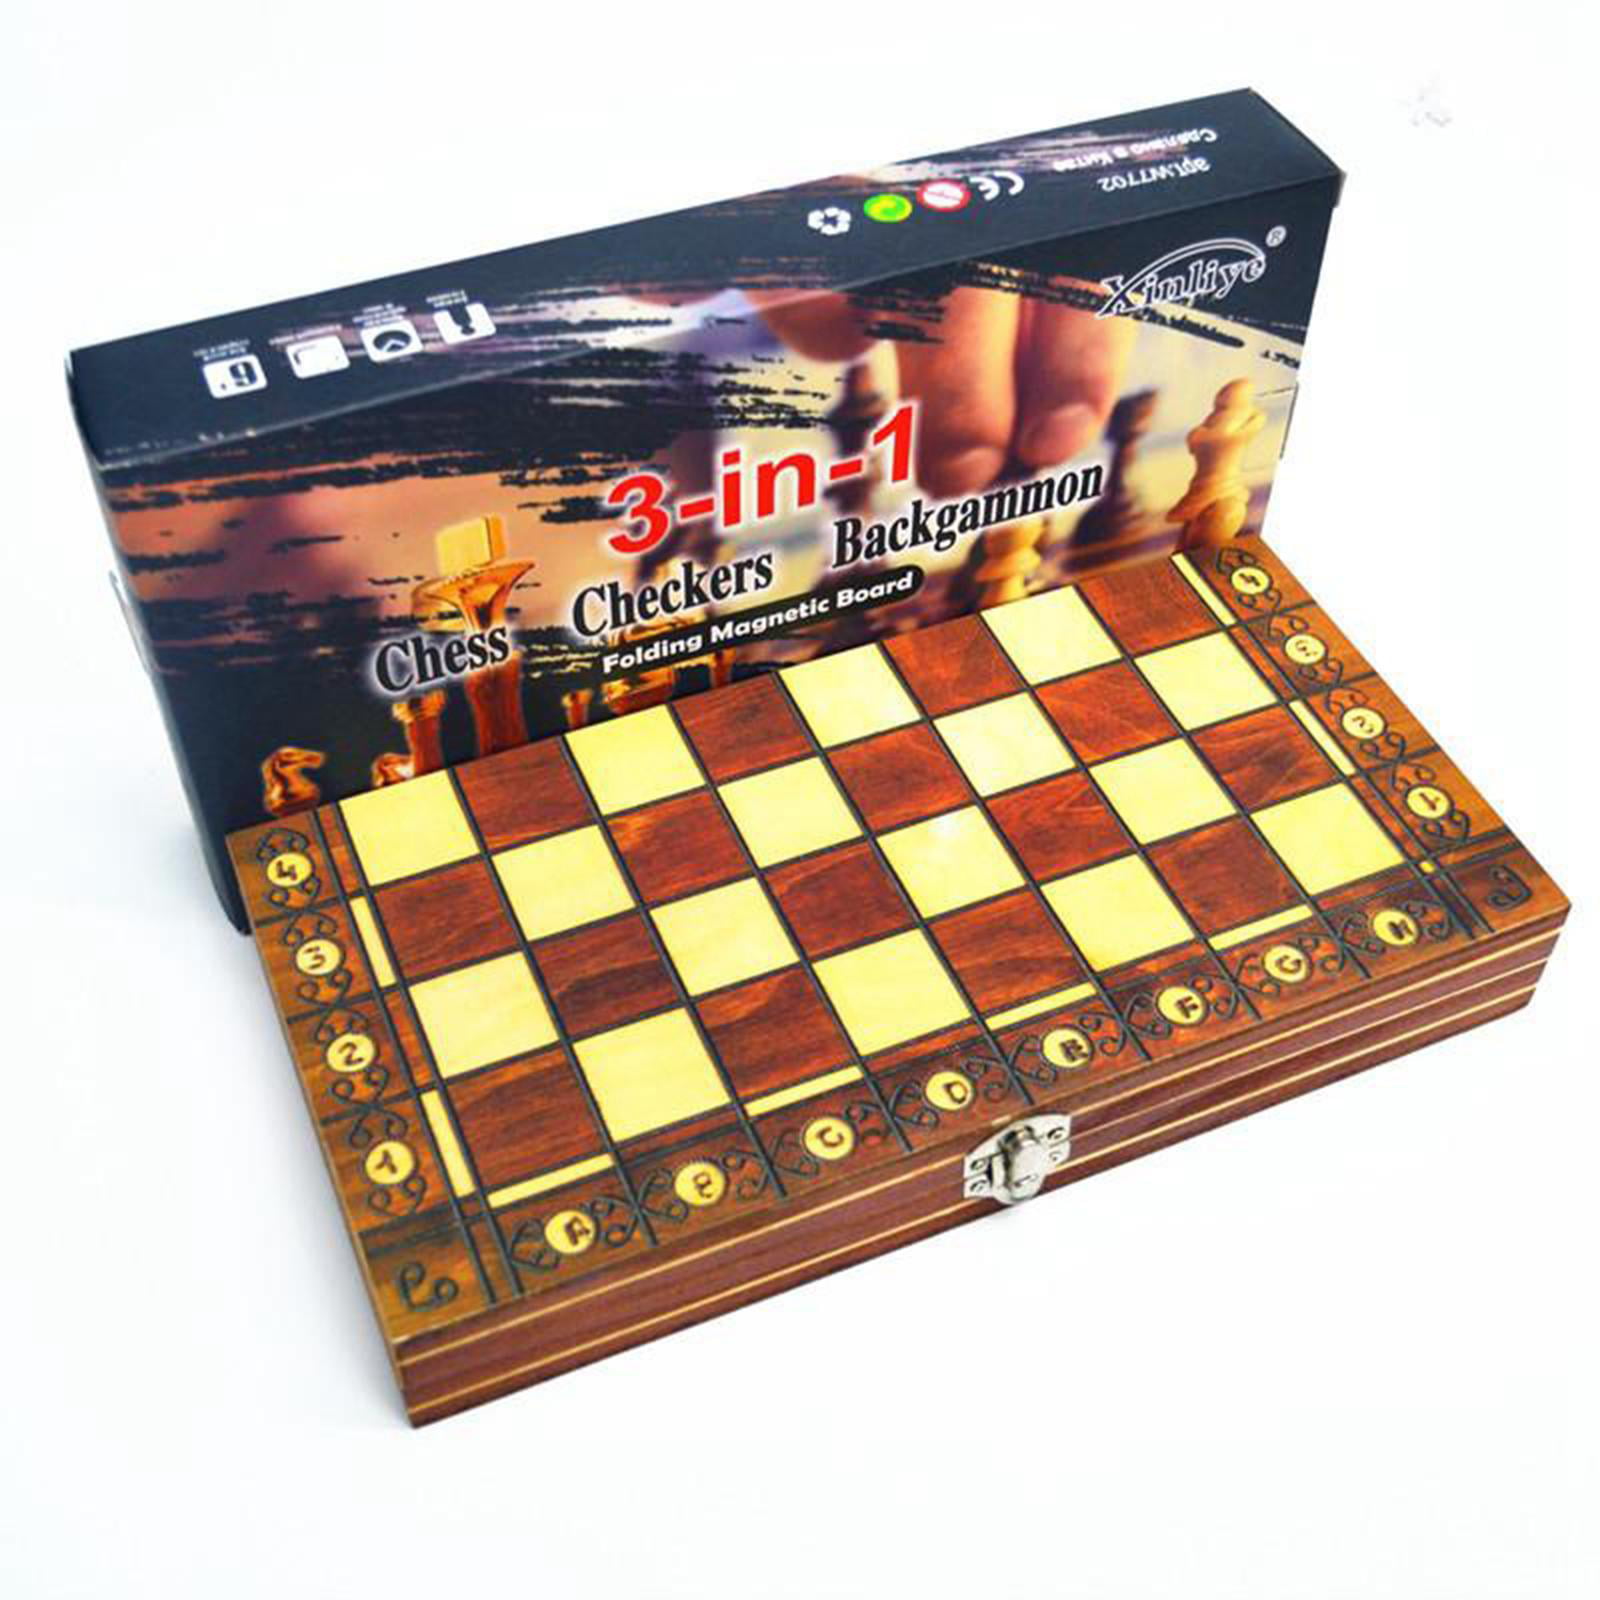 3 in 1 Chess Set Chess Checkers Backgammon Folding Wooden Chess Board 17x17inch 